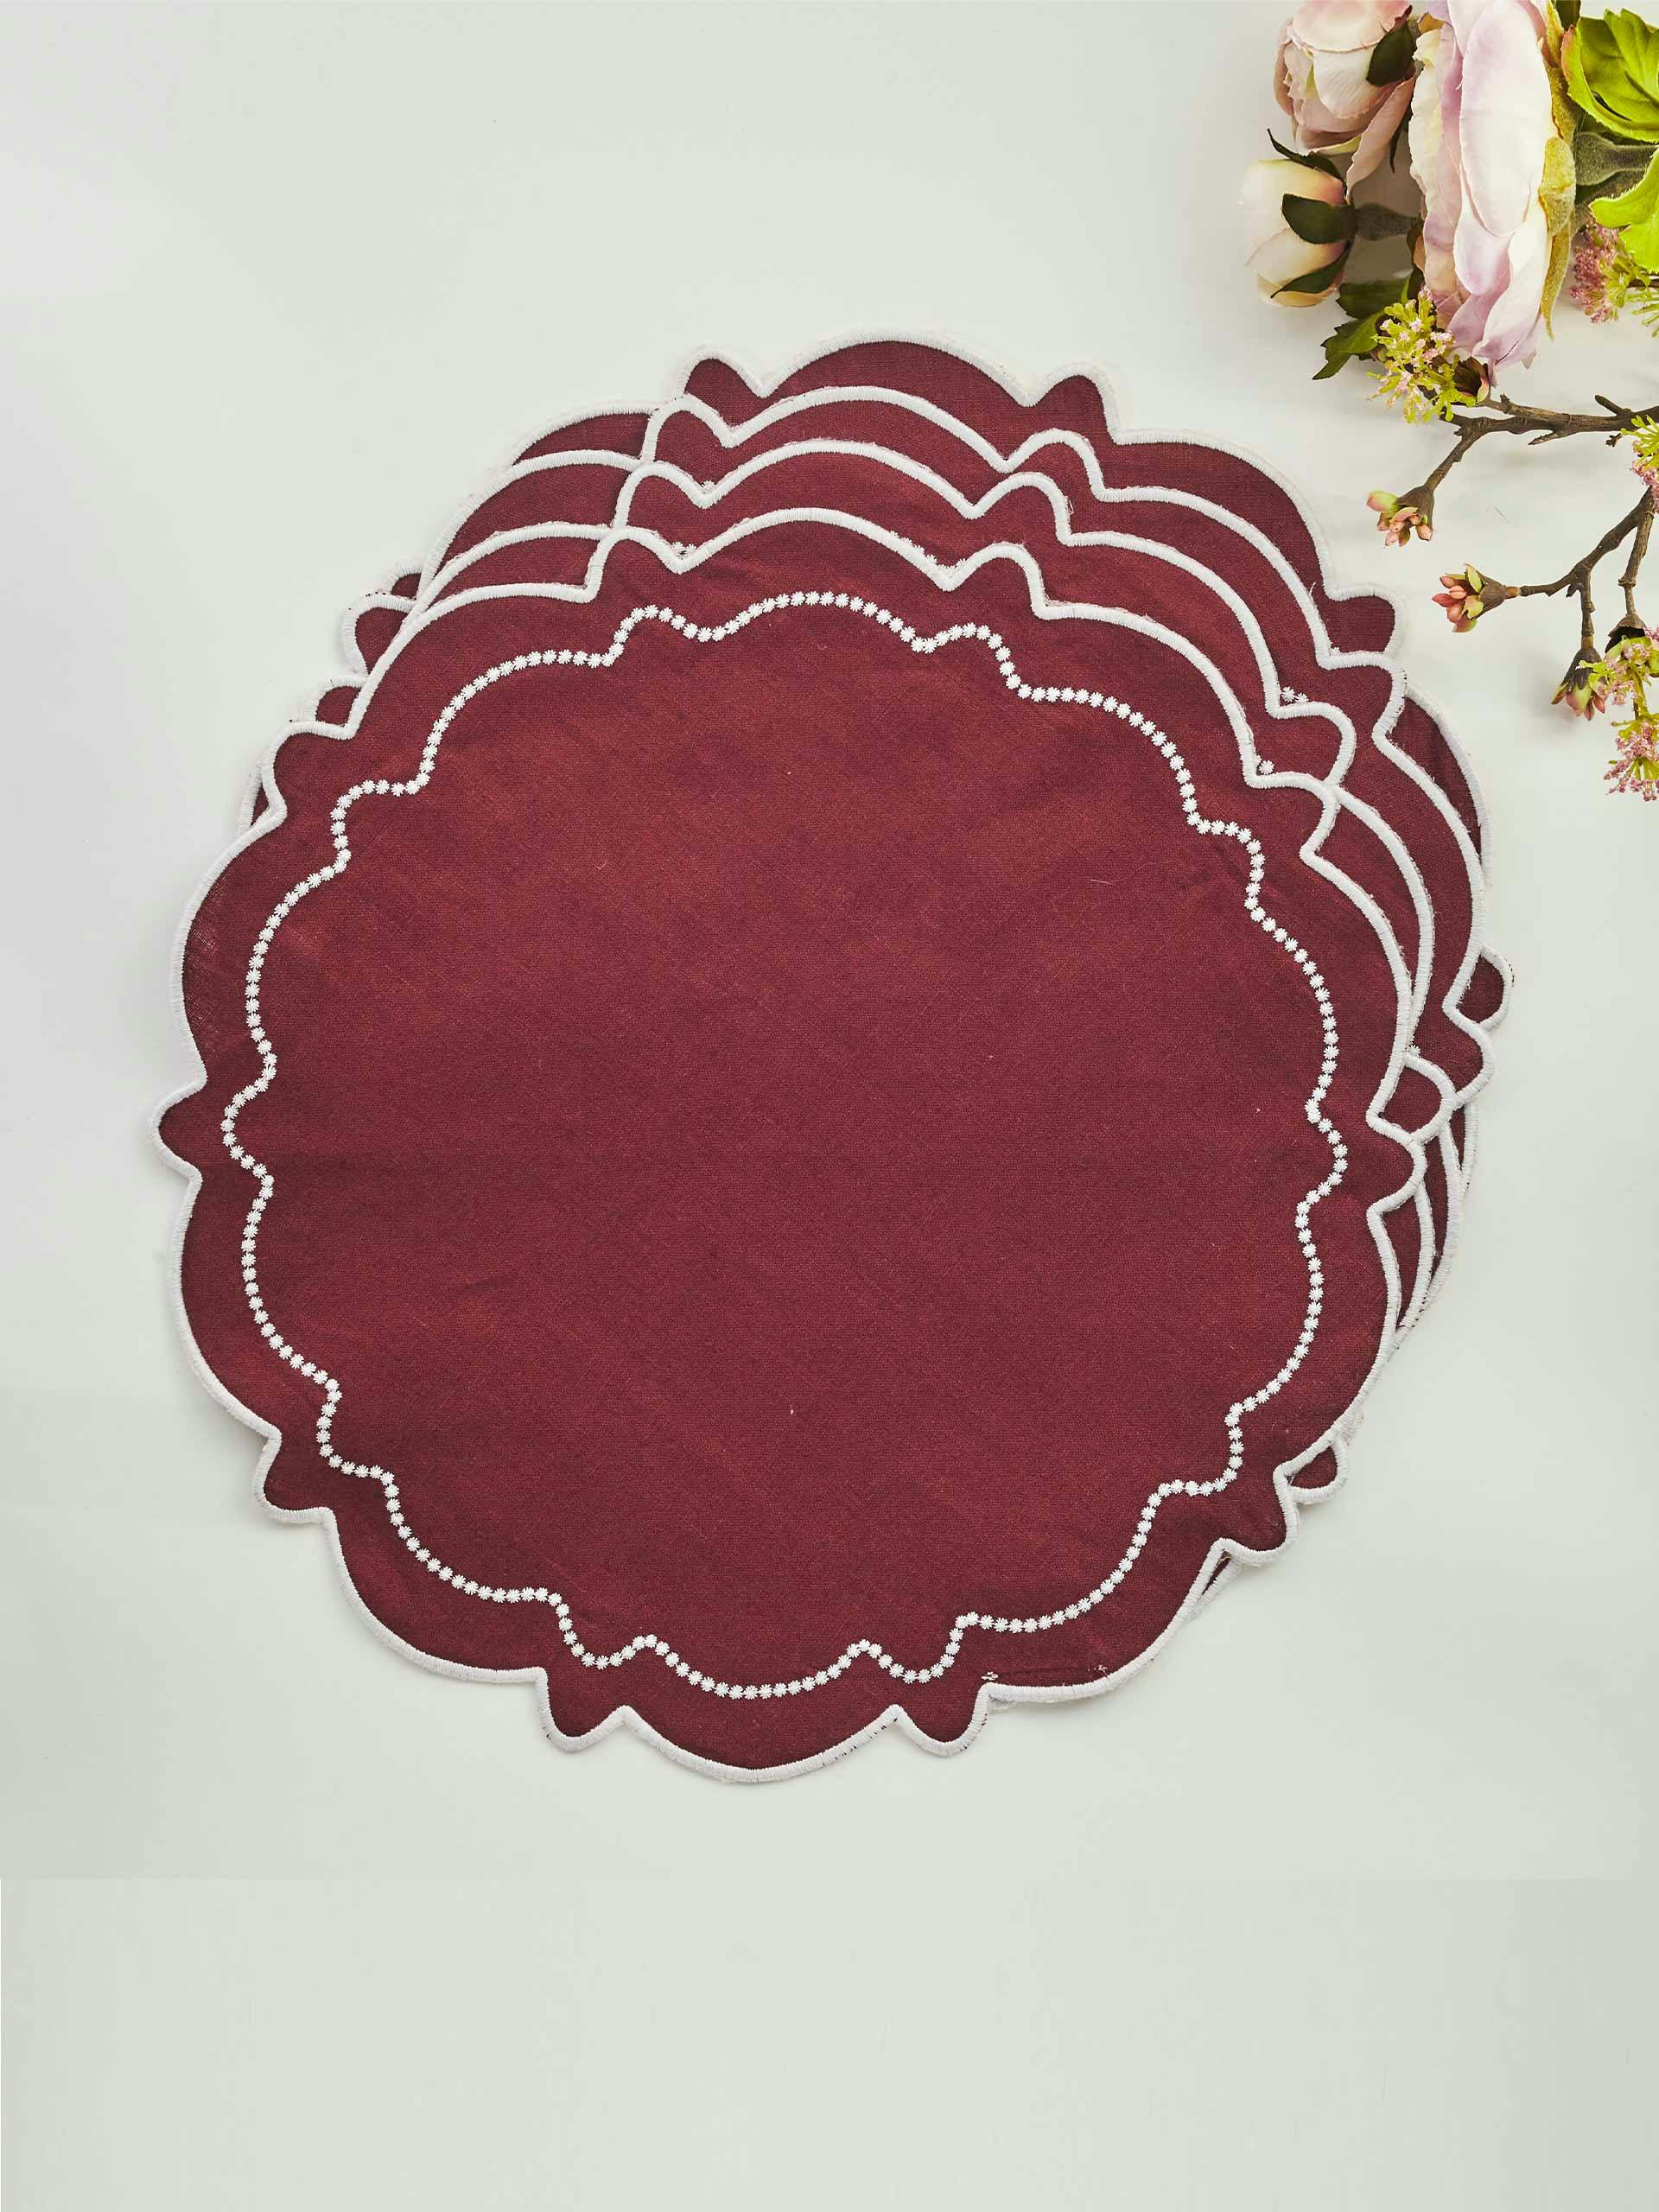 Burgundy placemats